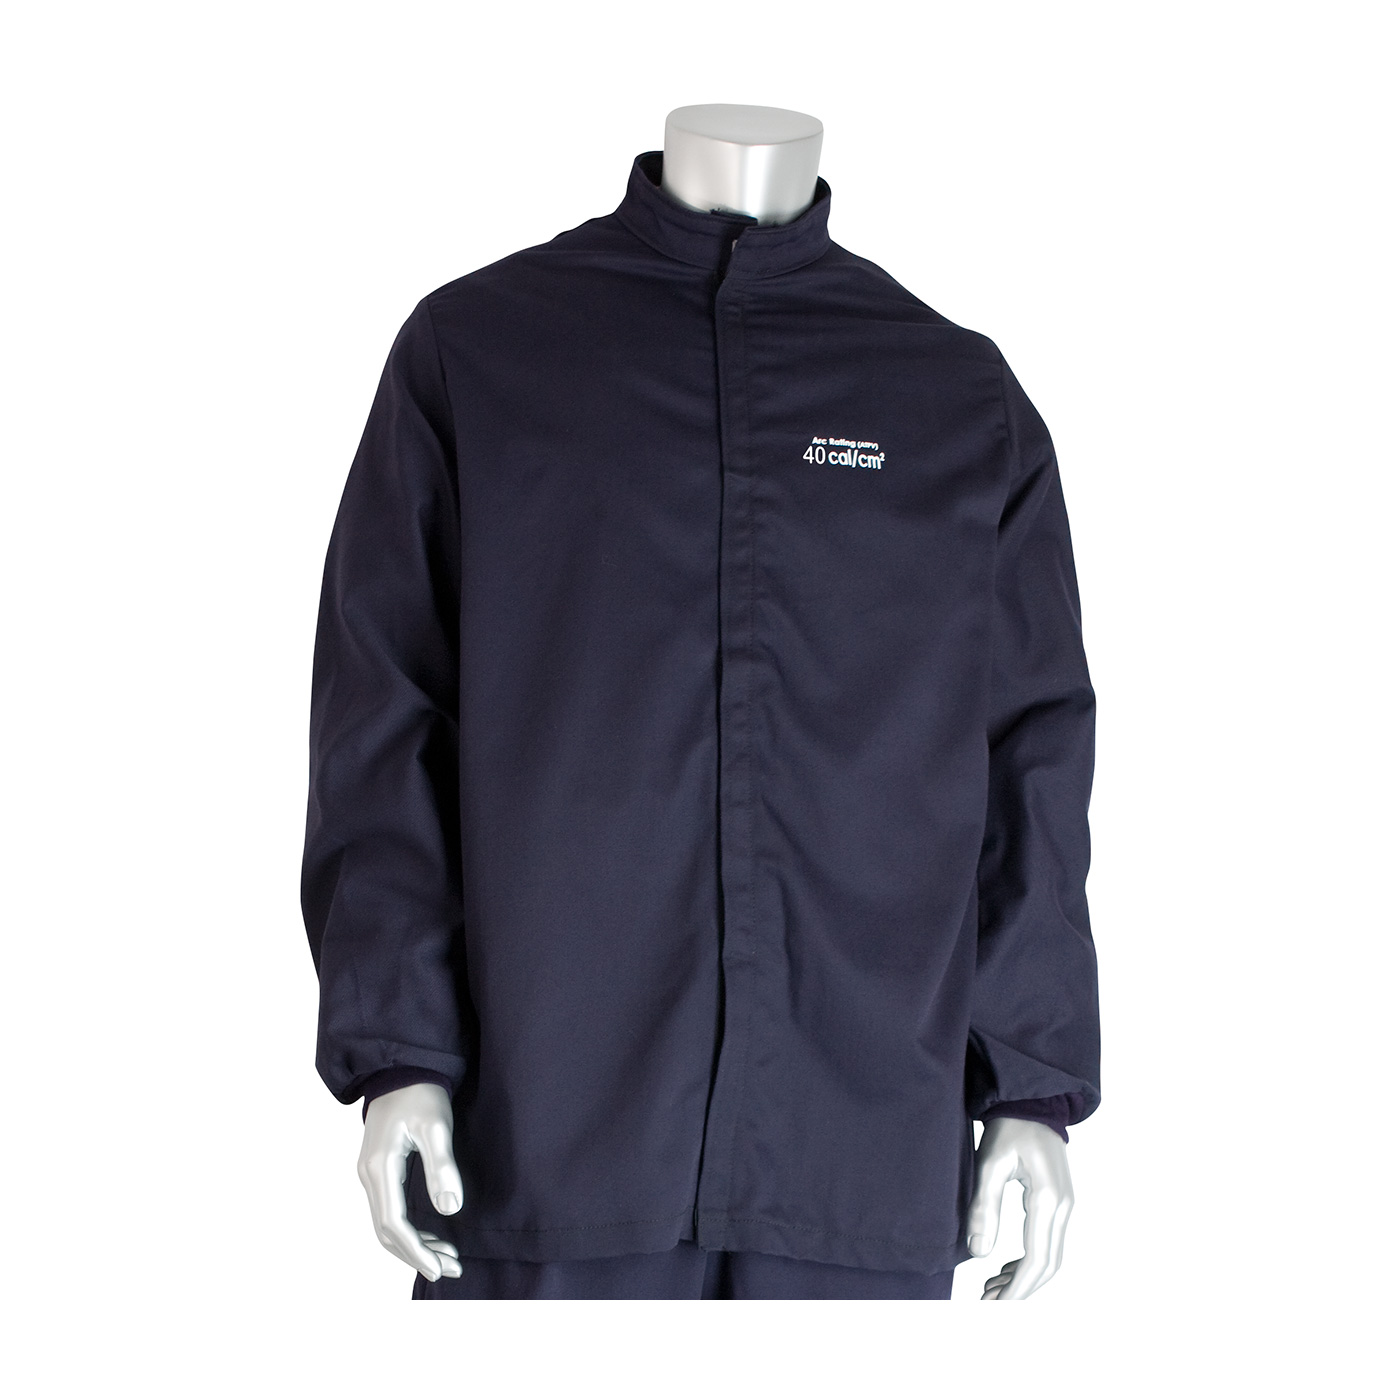 PIP® 40 cal/cm2 Navy Arc & Fire Resistant Safety Jacket